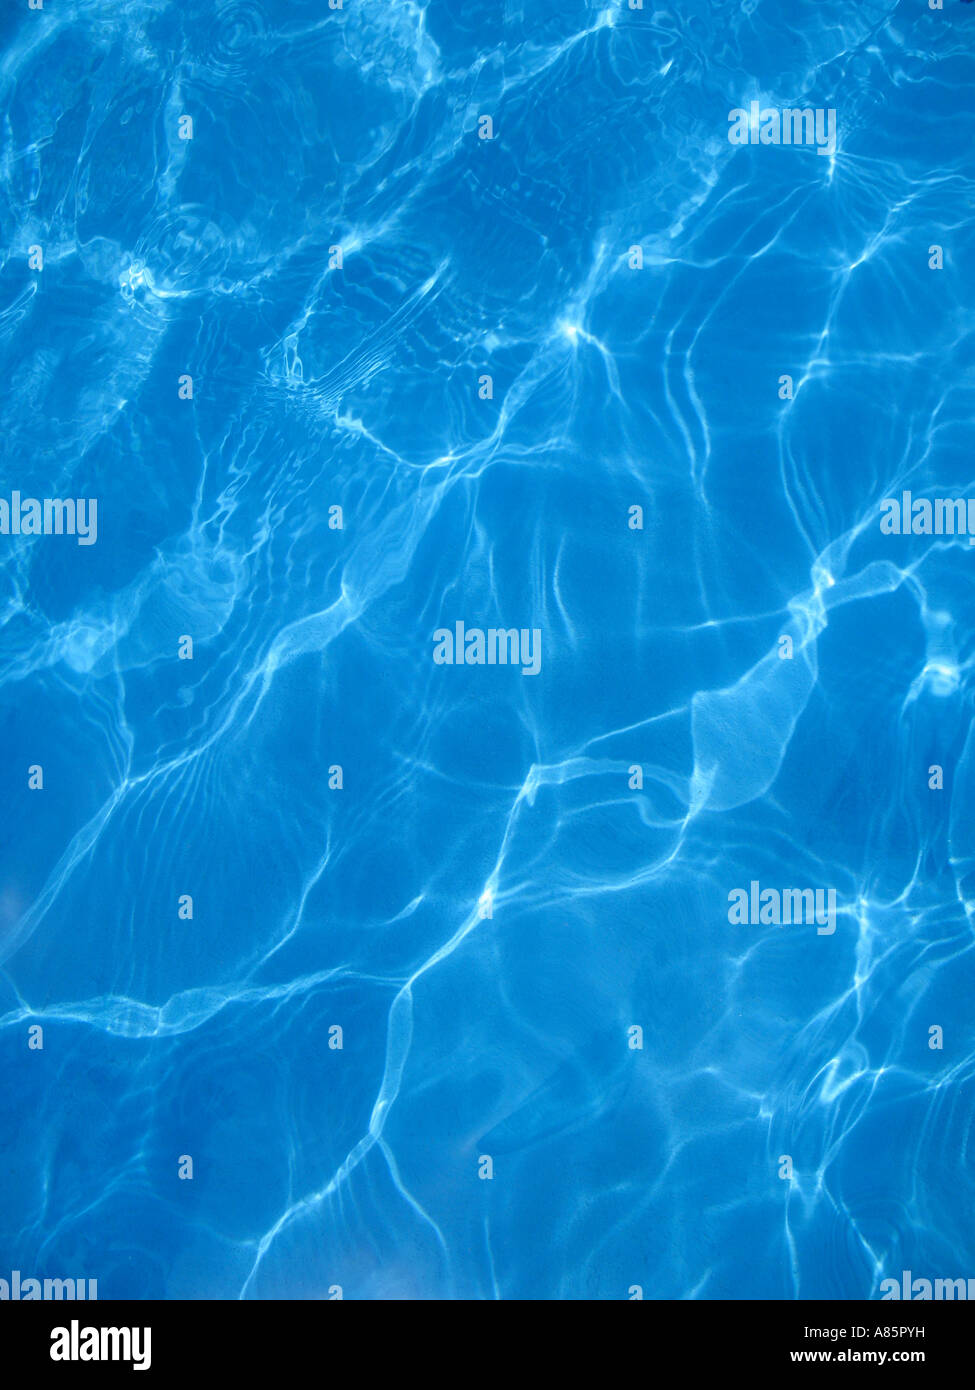 Pool water background texture Stock Photo